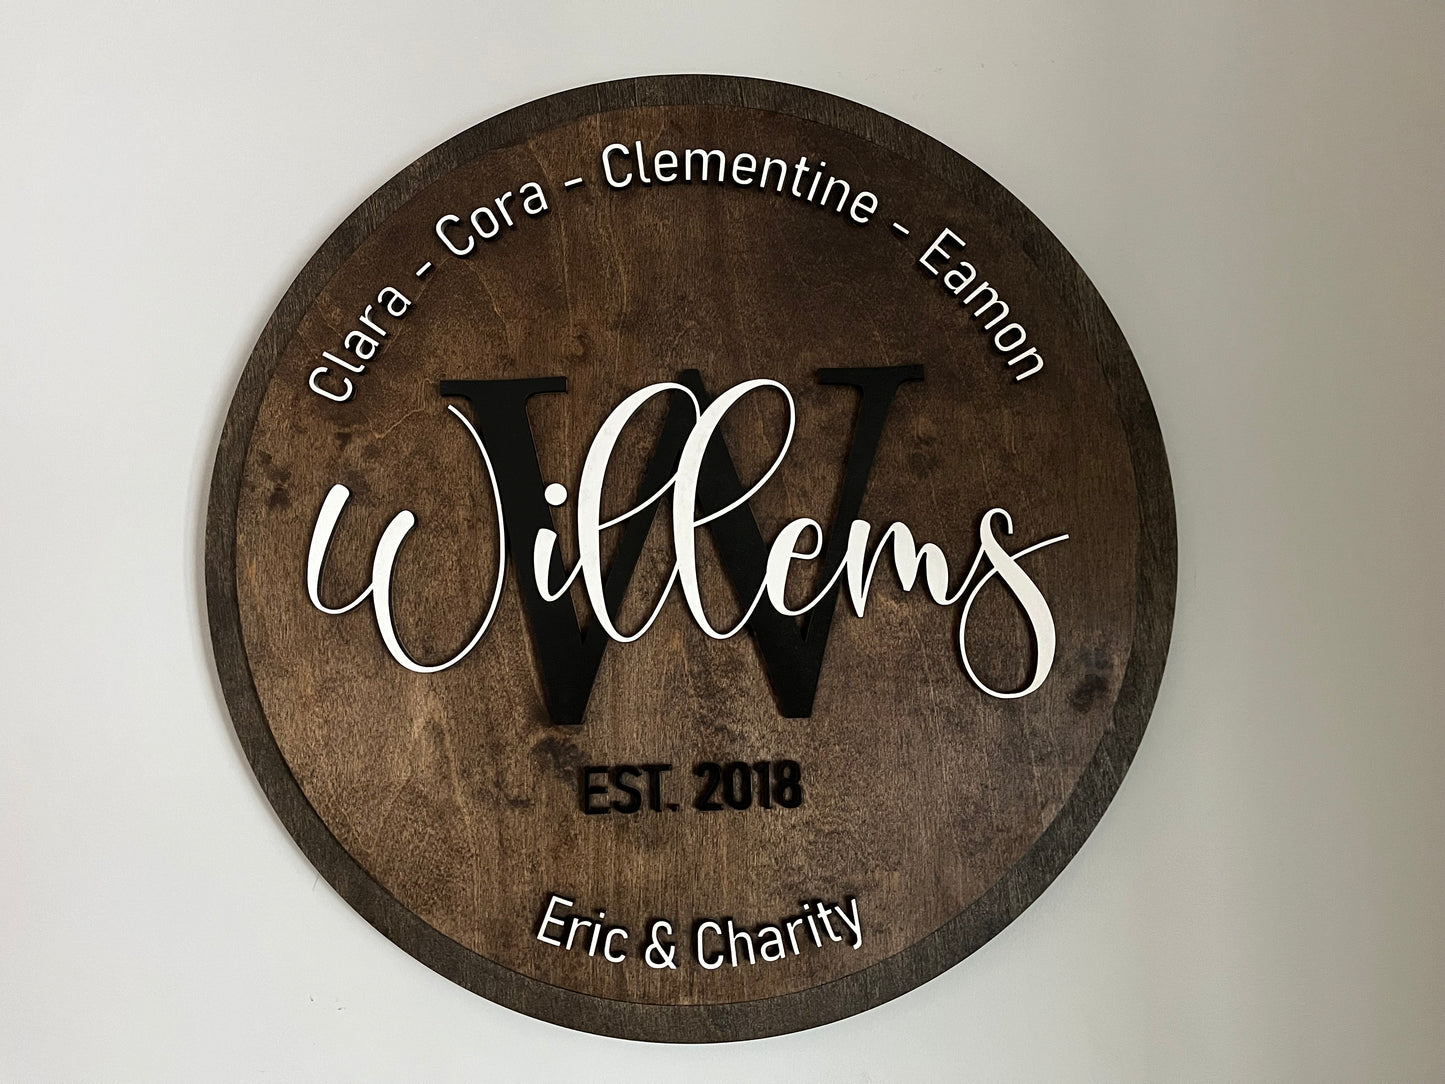 Personalized wood family name sign